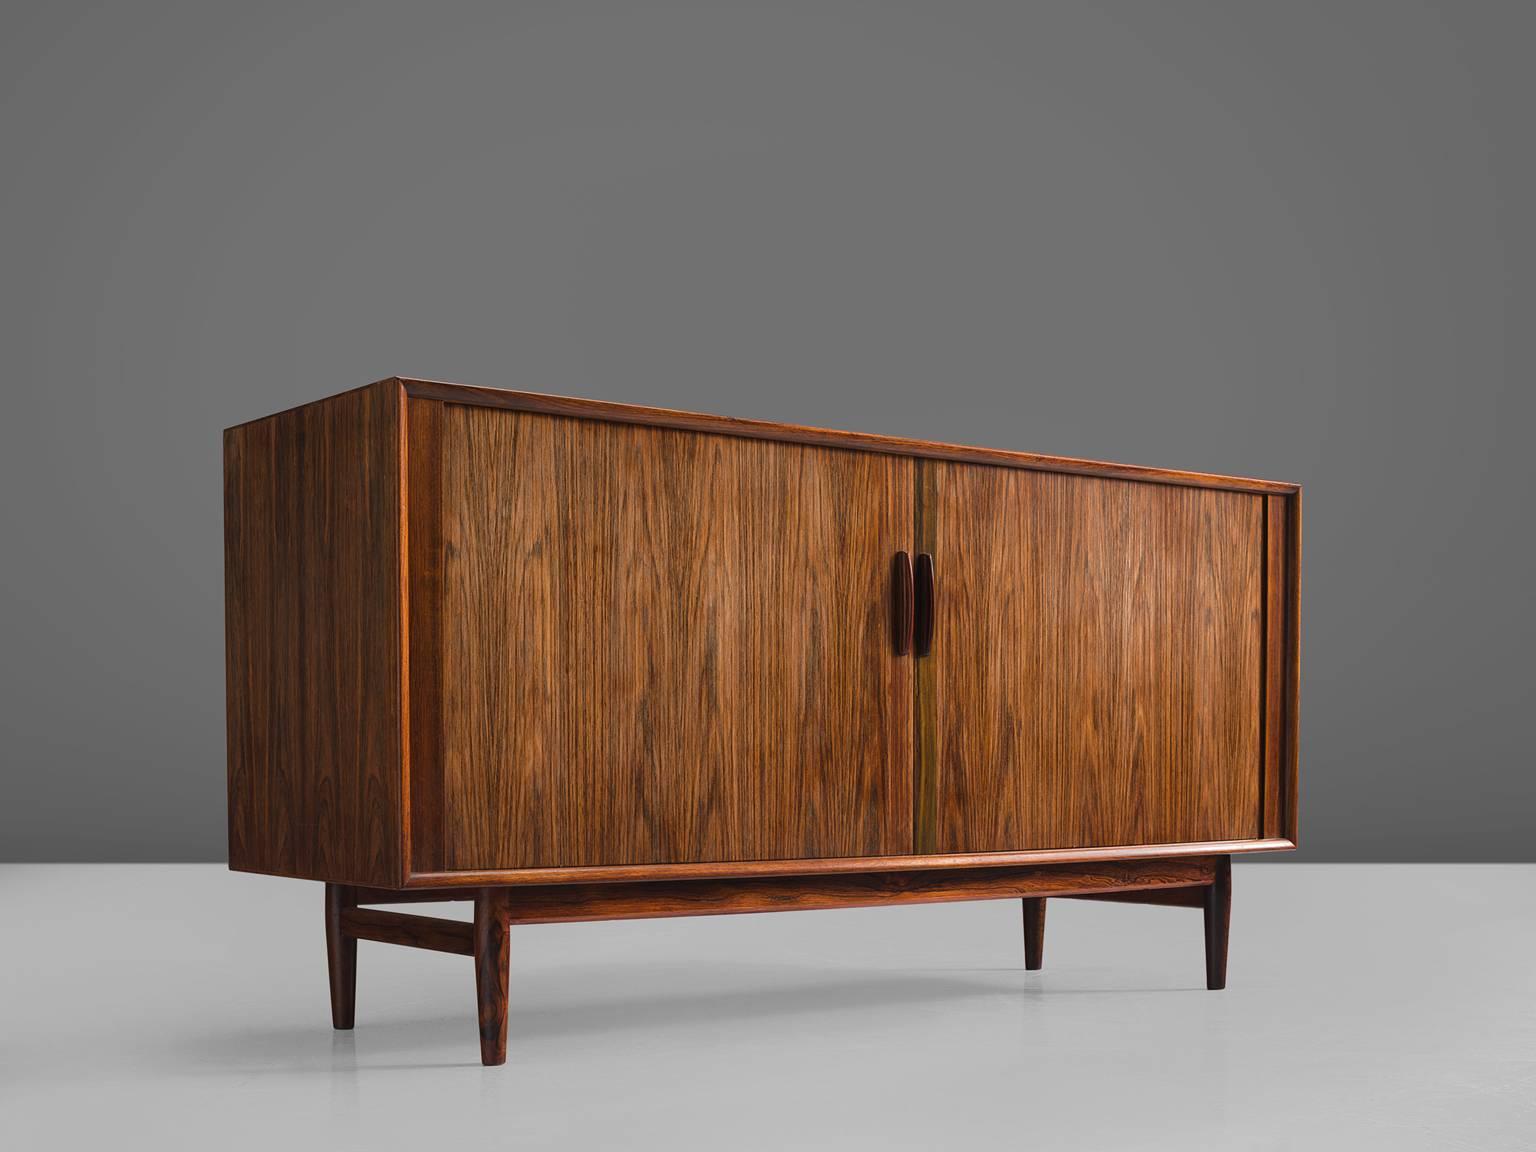 Arne Vodder for Sibast, rosewood, Denmark, 1960s.

This small rosewood sideboard is designed by Arne Vodder and is part of the midcentury design collection. The main features of this otherwise simple and modest cabinet are the flames and grain in